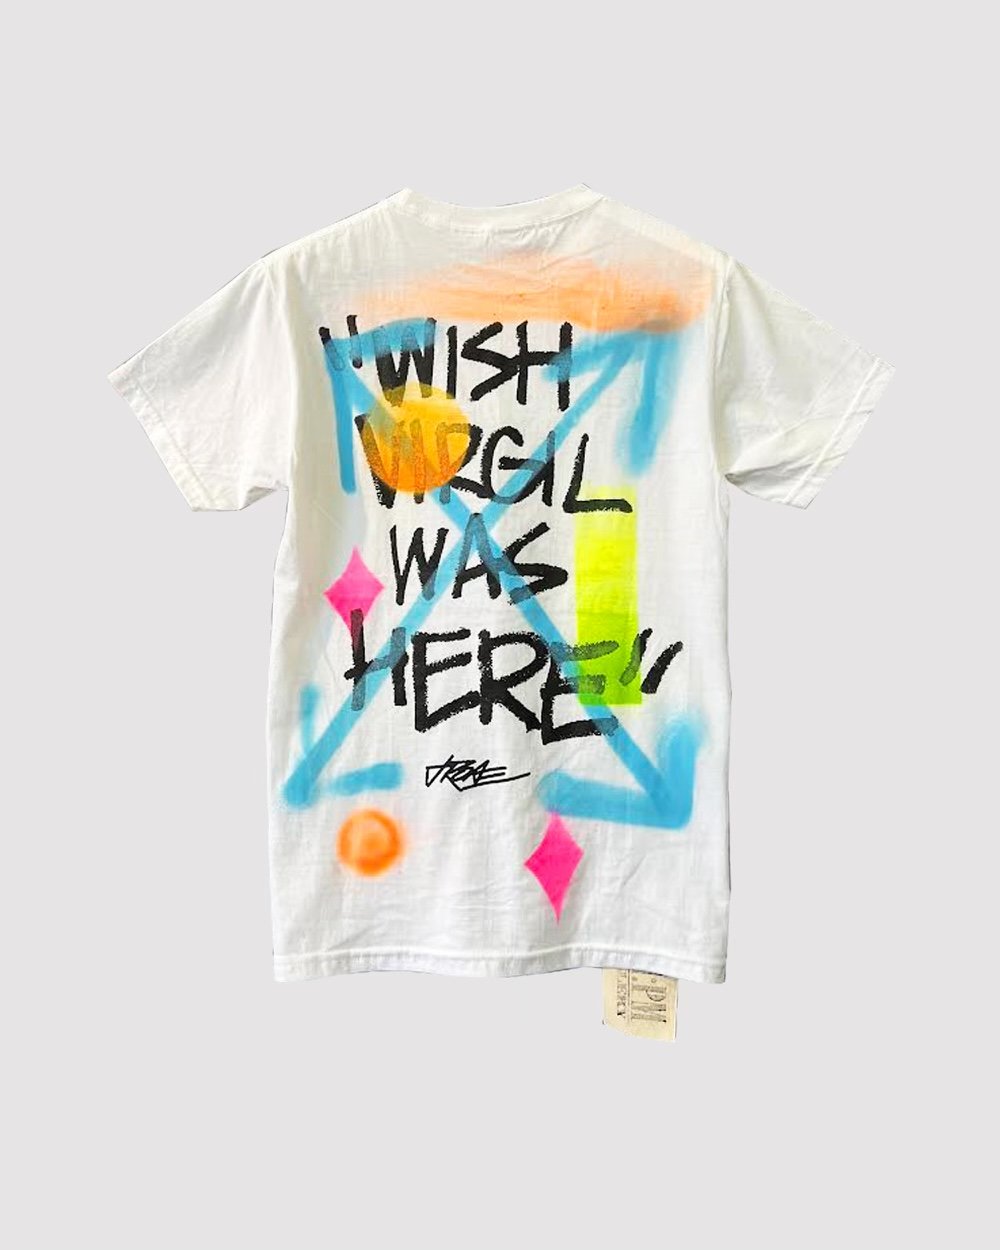 “WISH VIRGIL WAS HERE” CUSTOM ONE OF ONE T-SHIRT — AM:PM